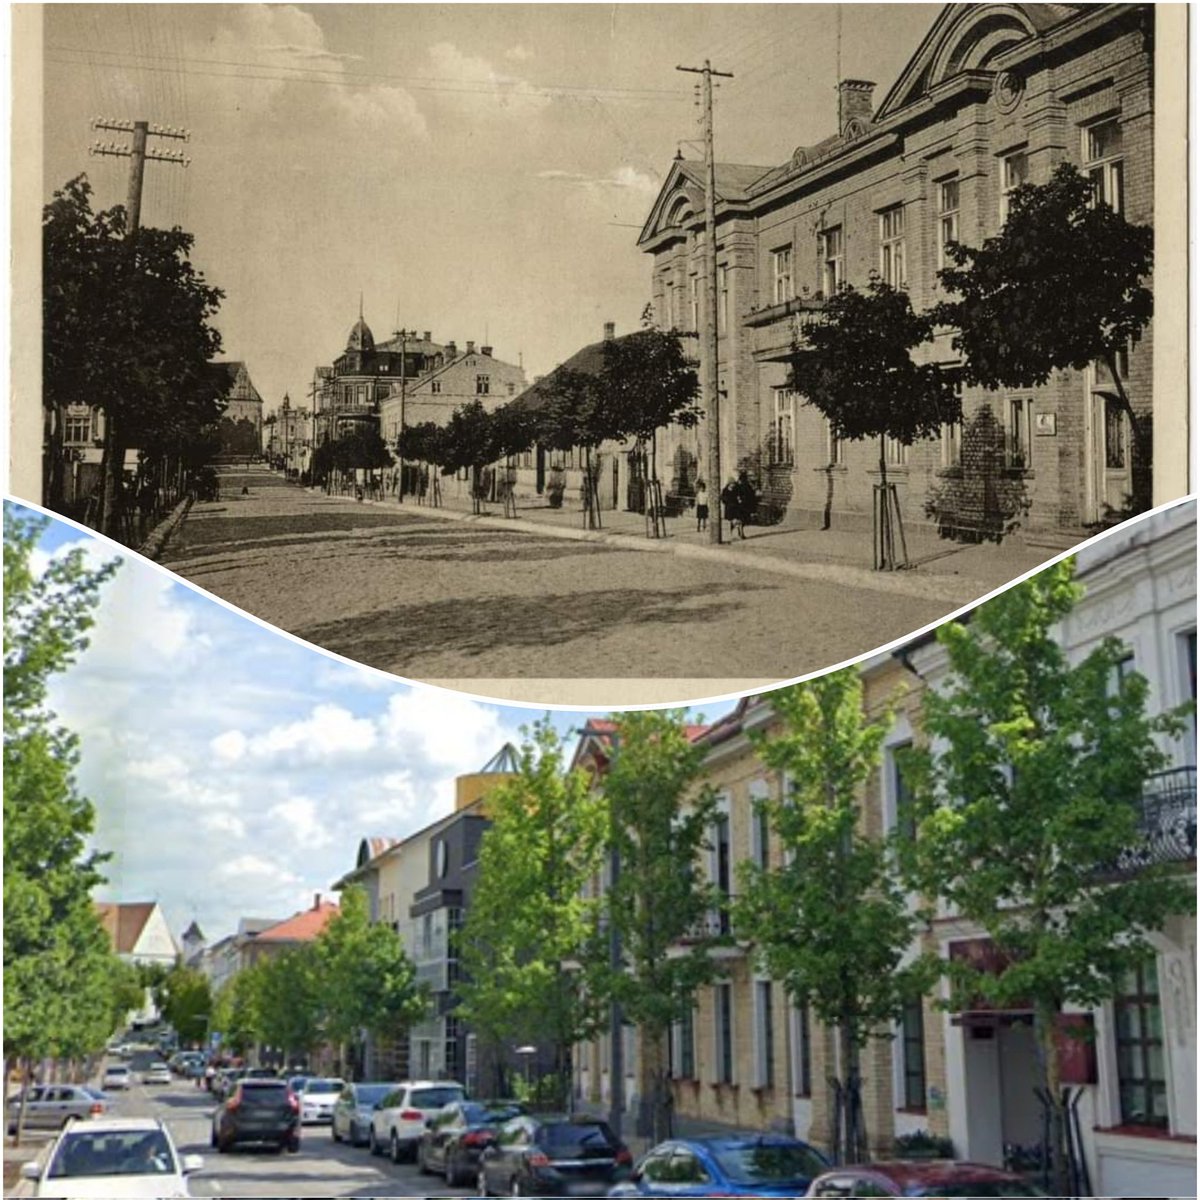 Šiauliai, Vasario 16th street in 1930 and today.